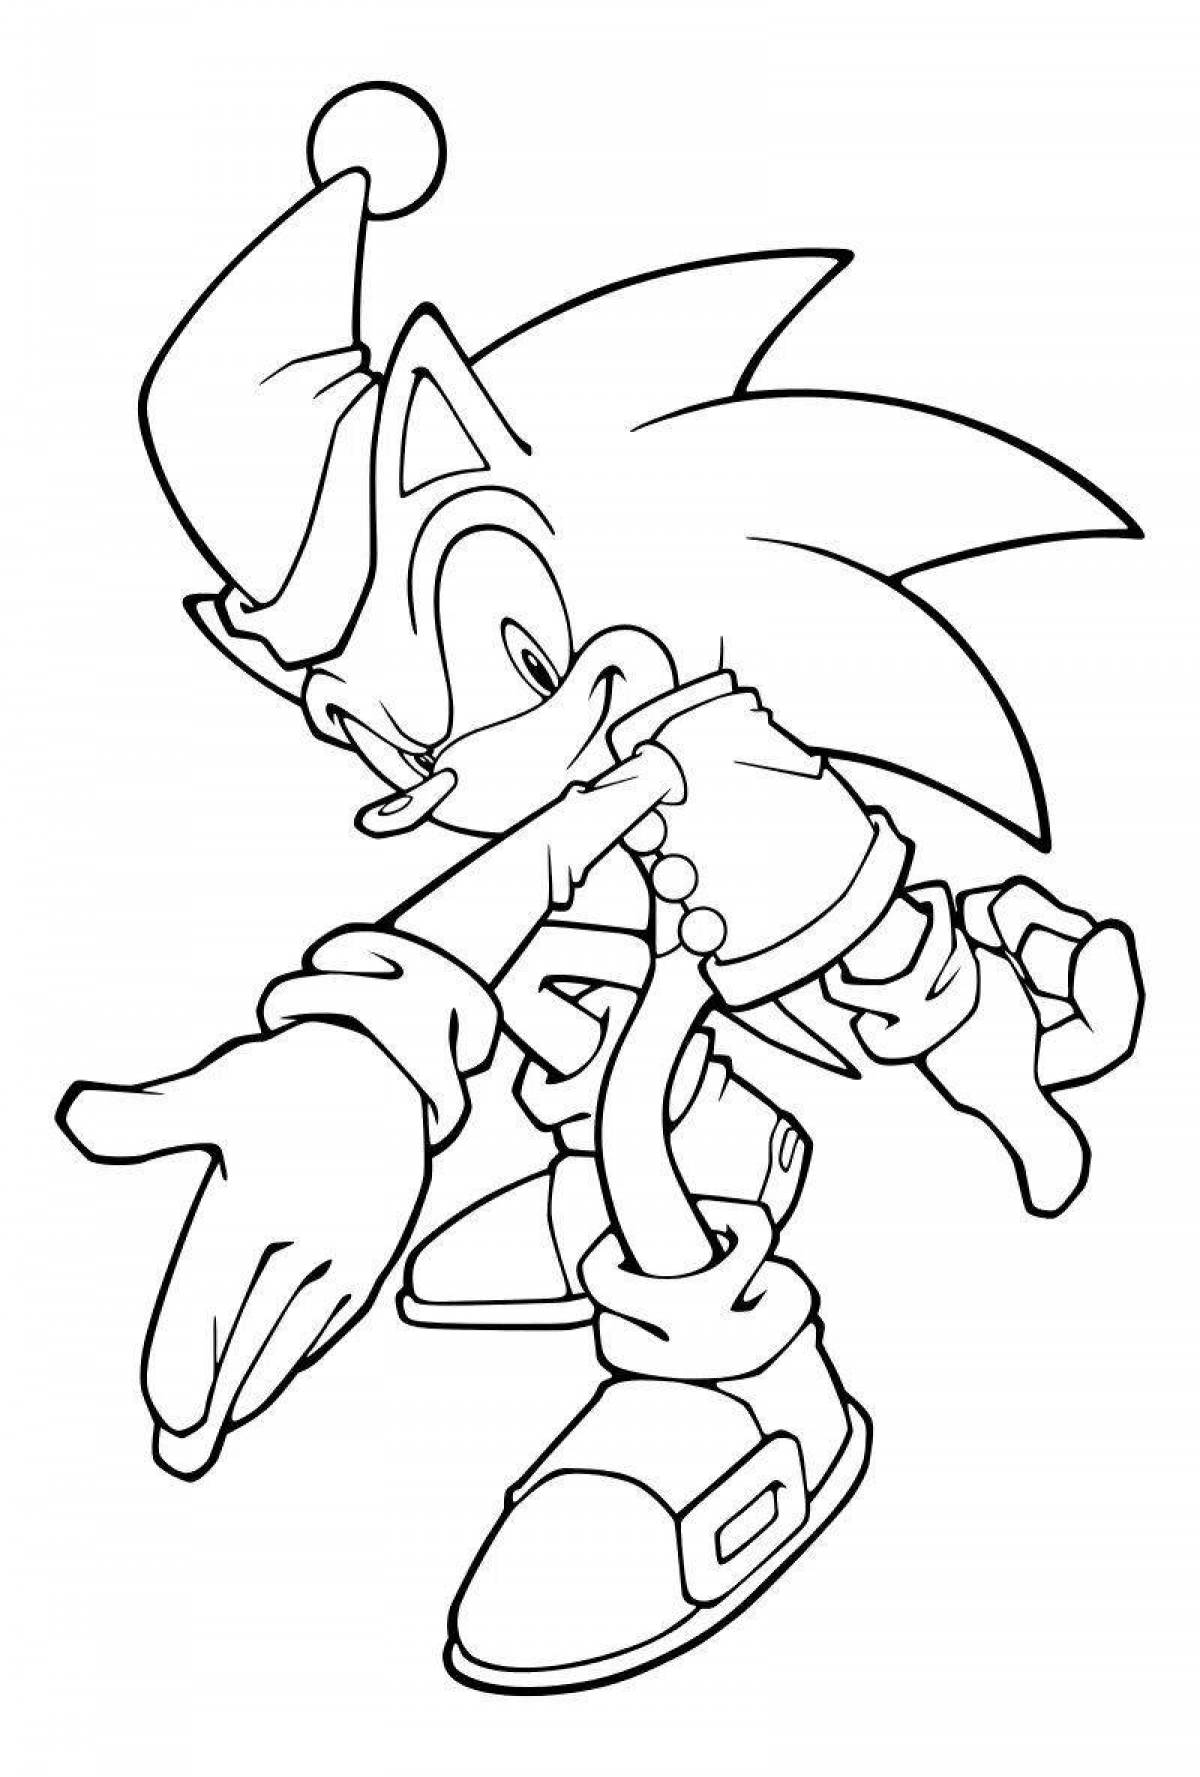 Amazing minecraft sonic coloring page